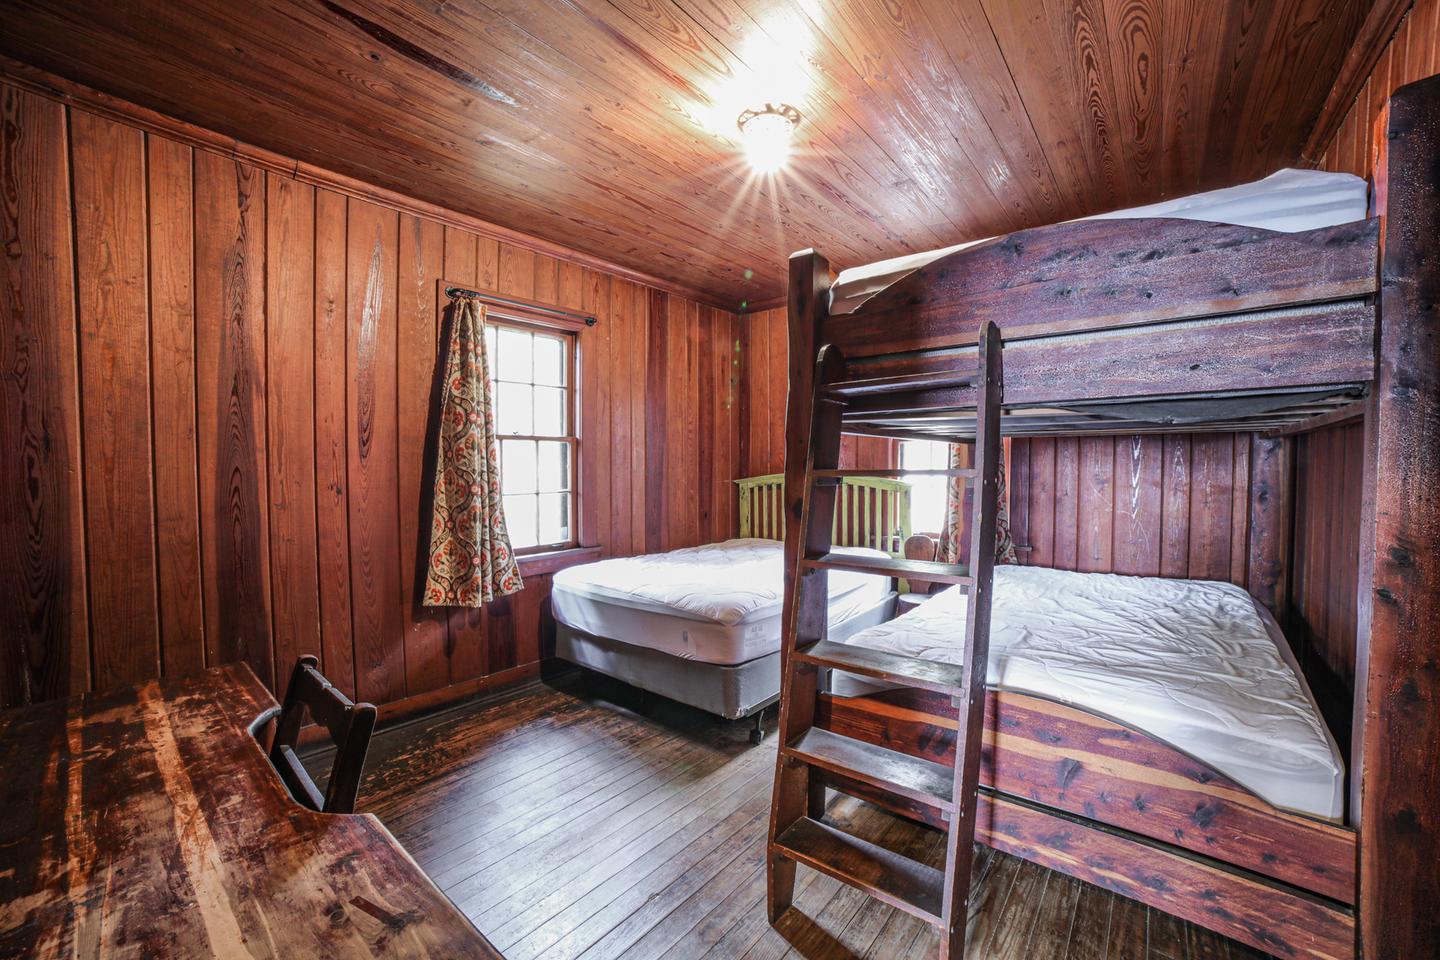 White Rock Mountain, Cabin B Bedroom.Cabin B bedroom has one full sized bed and one massive full sized bunkbed, new premium mattresses, clean mattress covers, electric stove when needed.